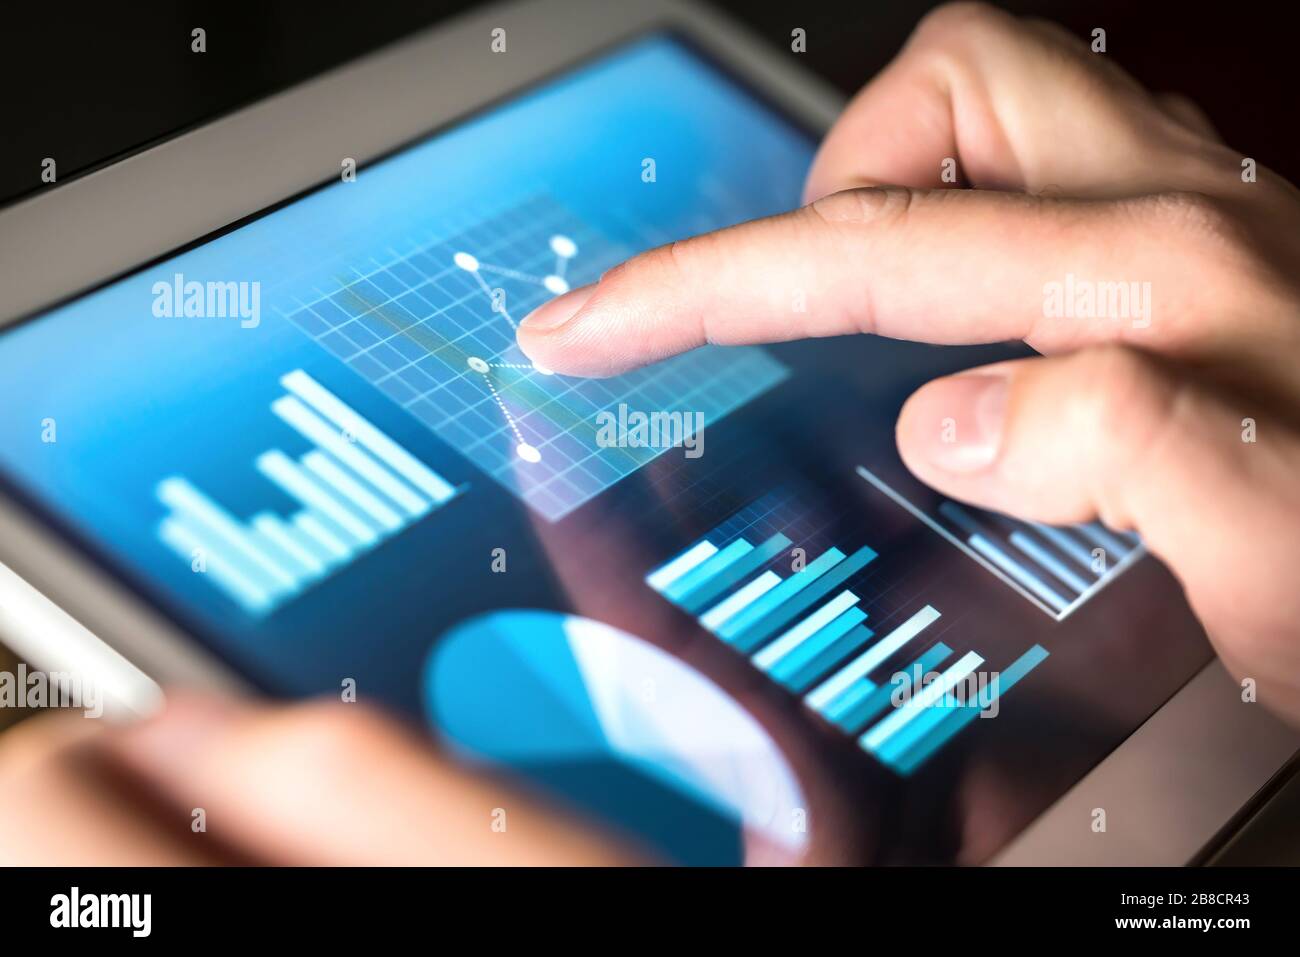 Business figures, graphs, chart and statistics. Market or economic report for financial analysis. Man working and using tablet. Finger touching screen. Stock Photo